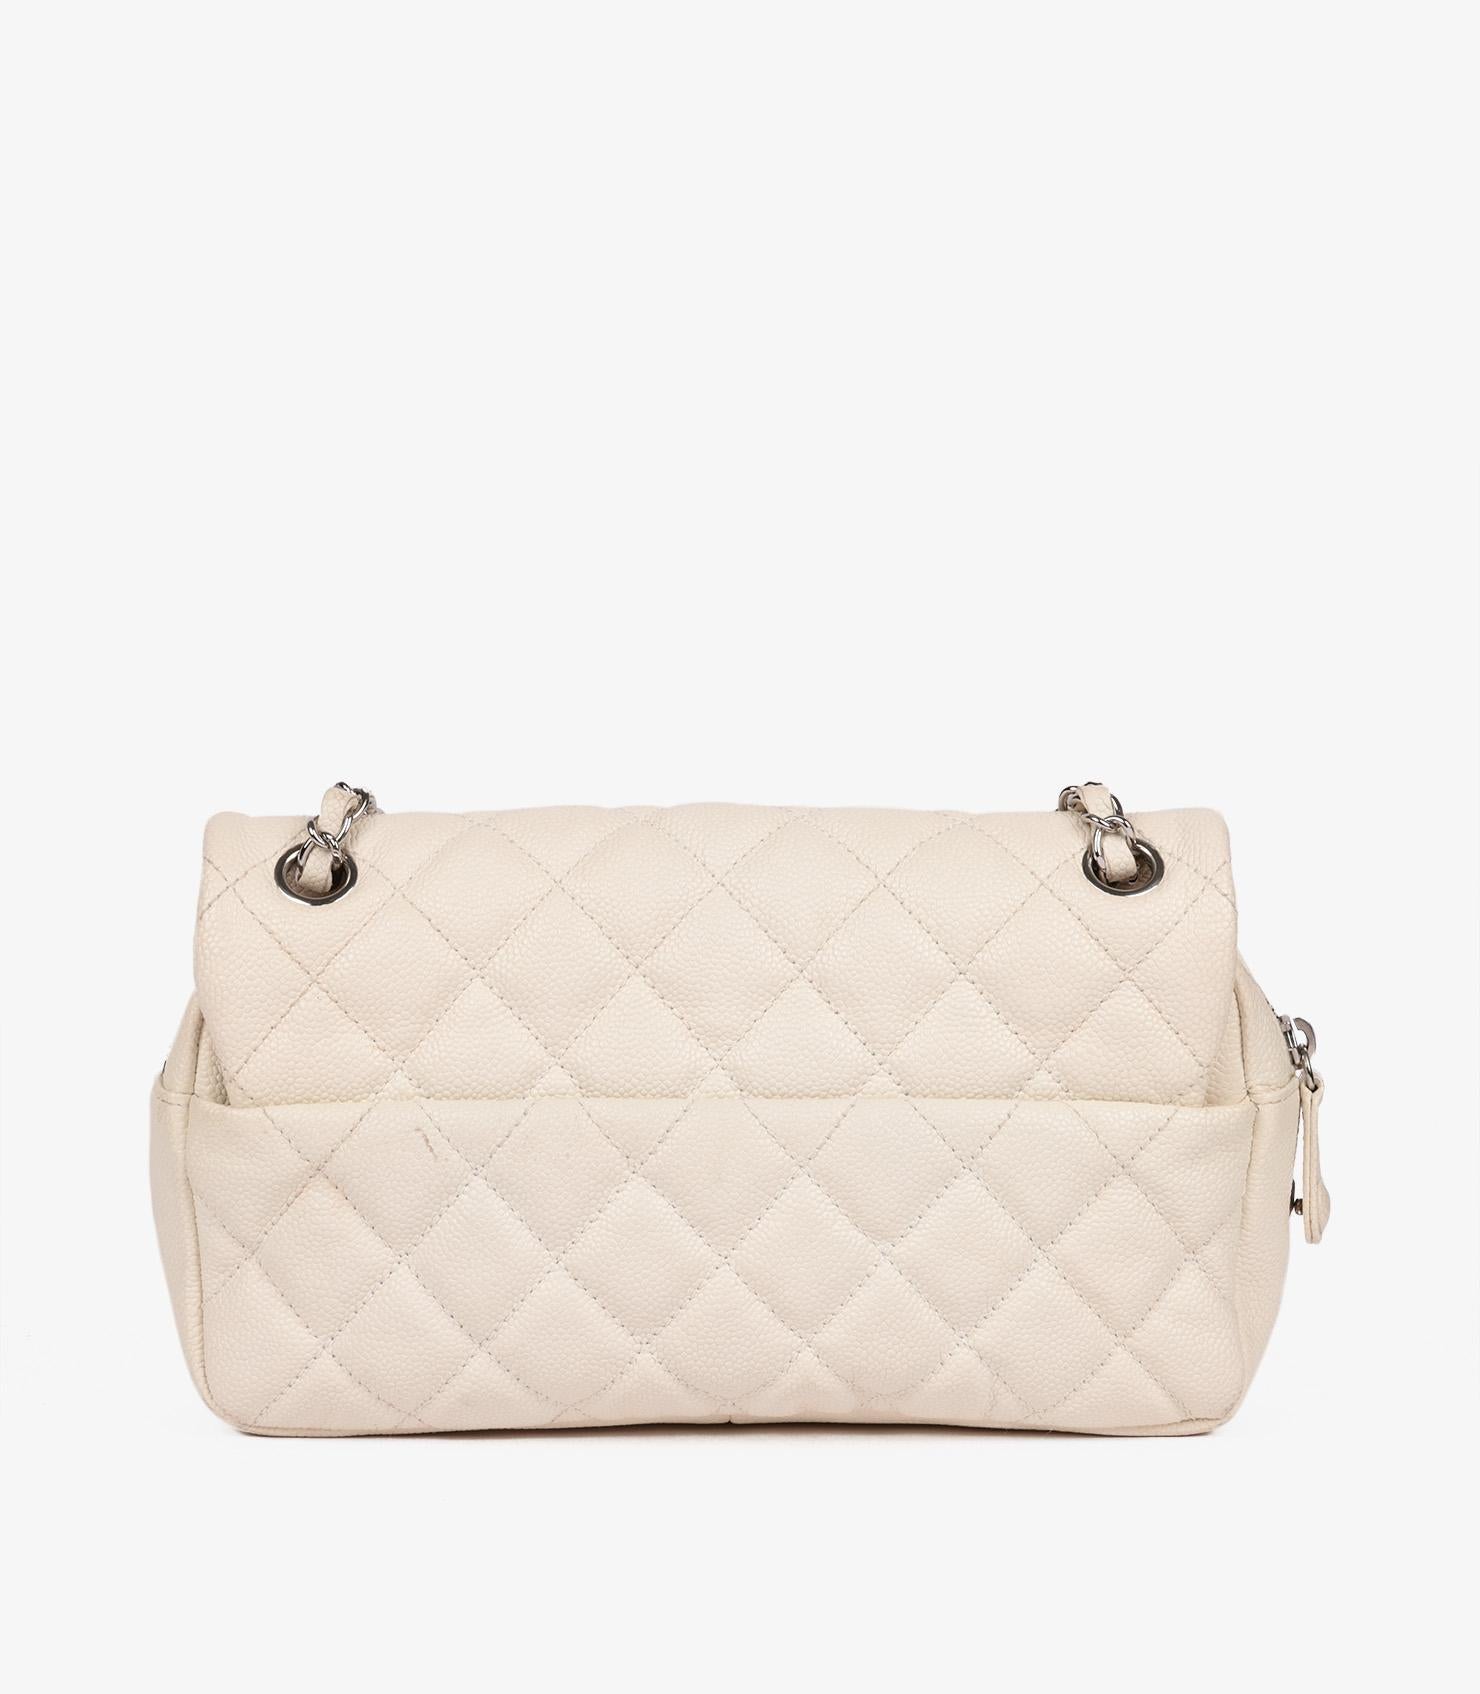 Chanel Off White Quilted Caviar Leather Medium Easy Carry Classic Flap Bag For Sale 2